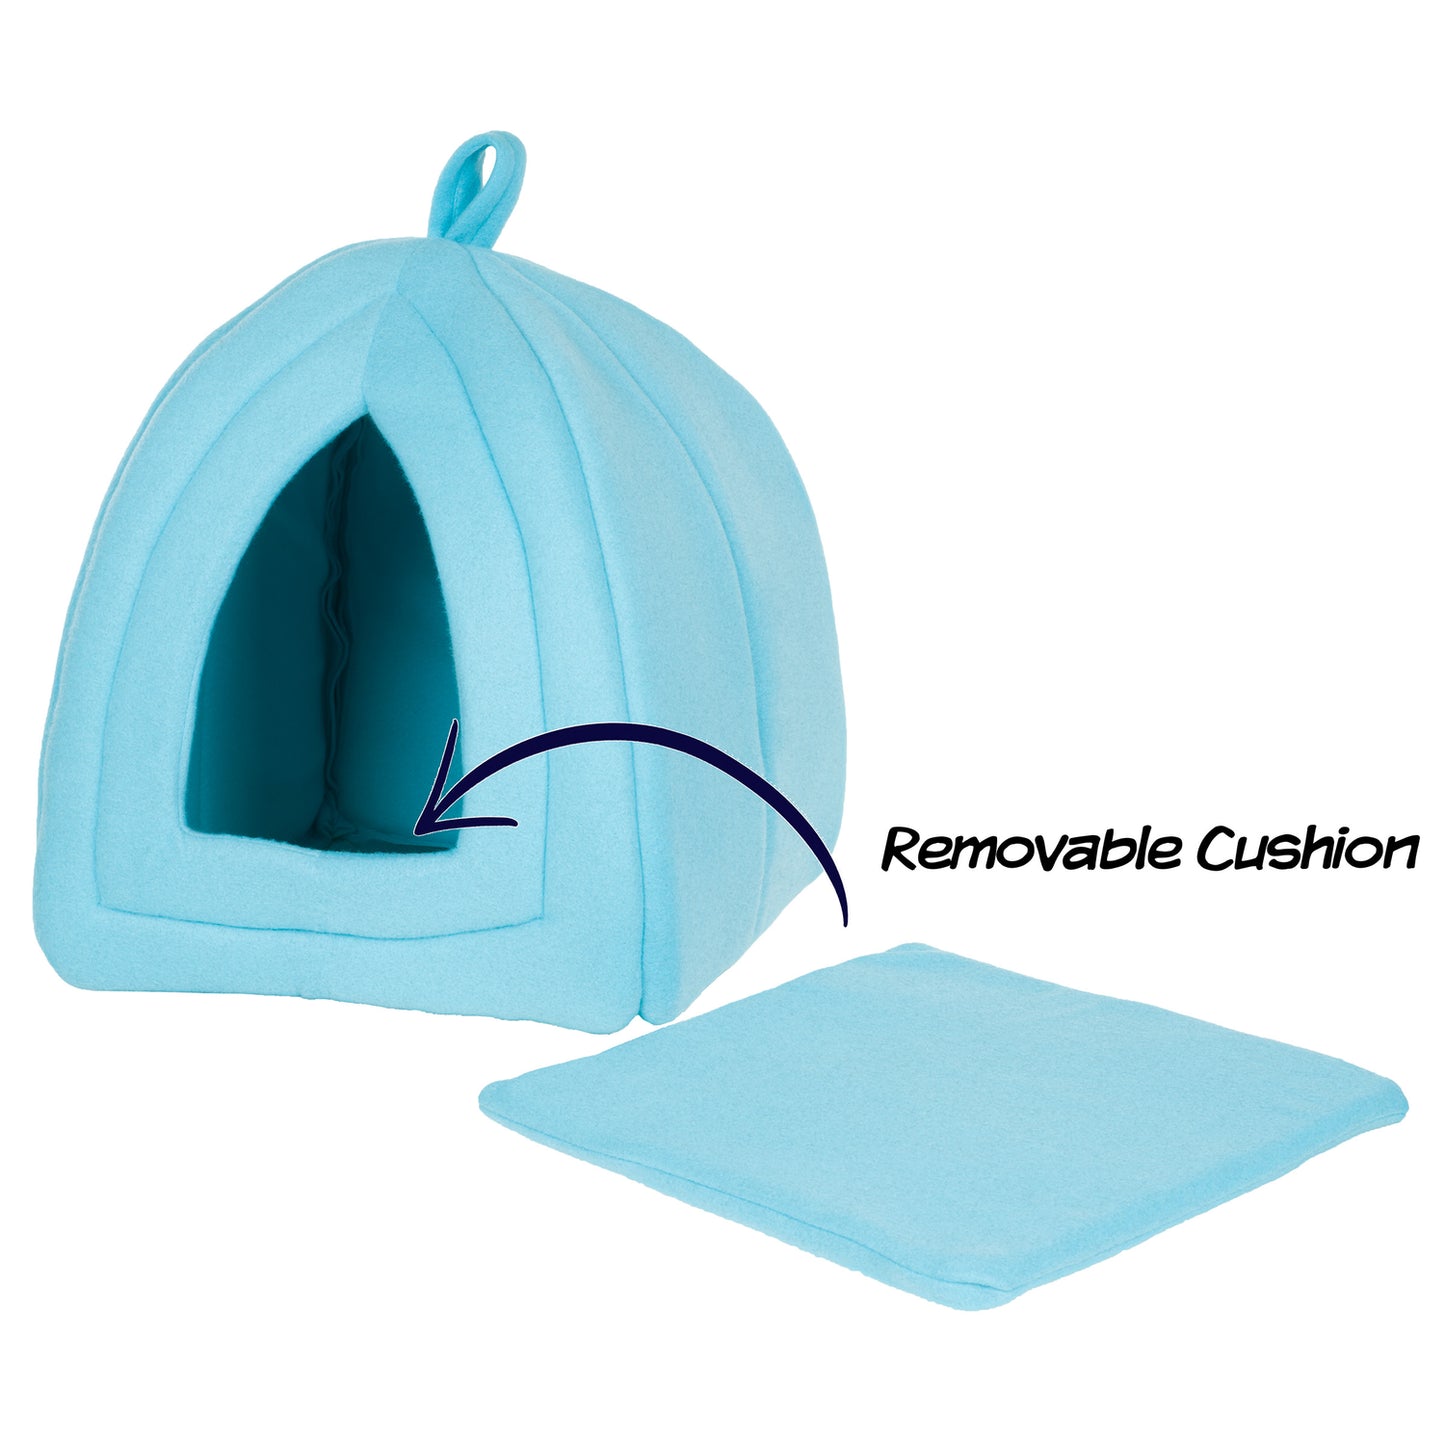 Cat House – Cat Beds for Indoor Cats with Removable Foam Cushion – Comfortable Pet Tent for Kittens, Small Dogs and Aging Pets by Petmaker (Blue)